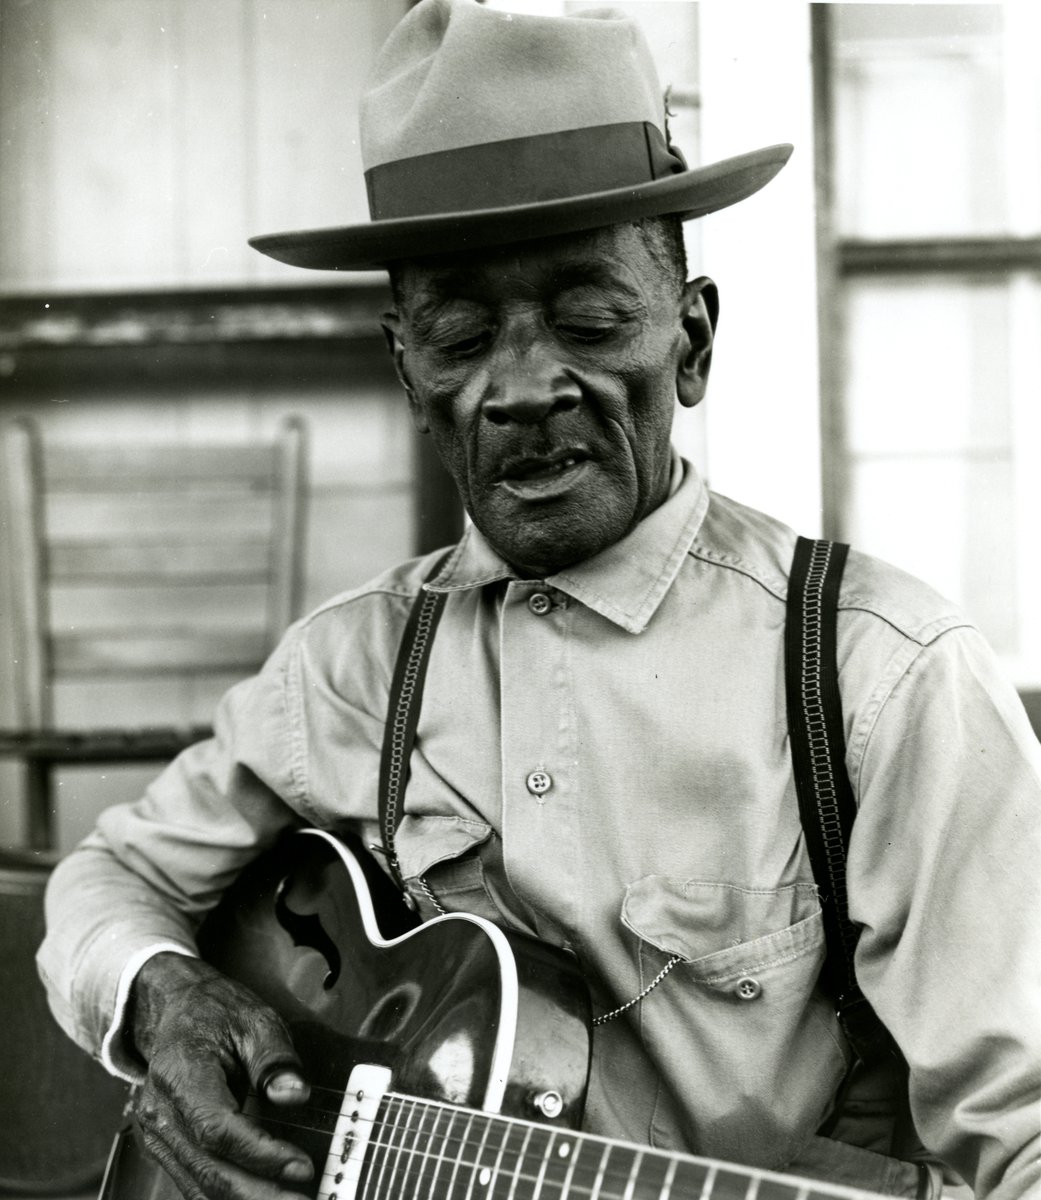 Remembering legendary songster Mance Lipscomb, born 128 years ago today in Navasota, Texas. This new photo of Mance comes from the upcoming compilation, Playing for the Man at the Door. Photo by Ed Badeaux, Robert “Mack” McCormick Collection, National Museum of American History.